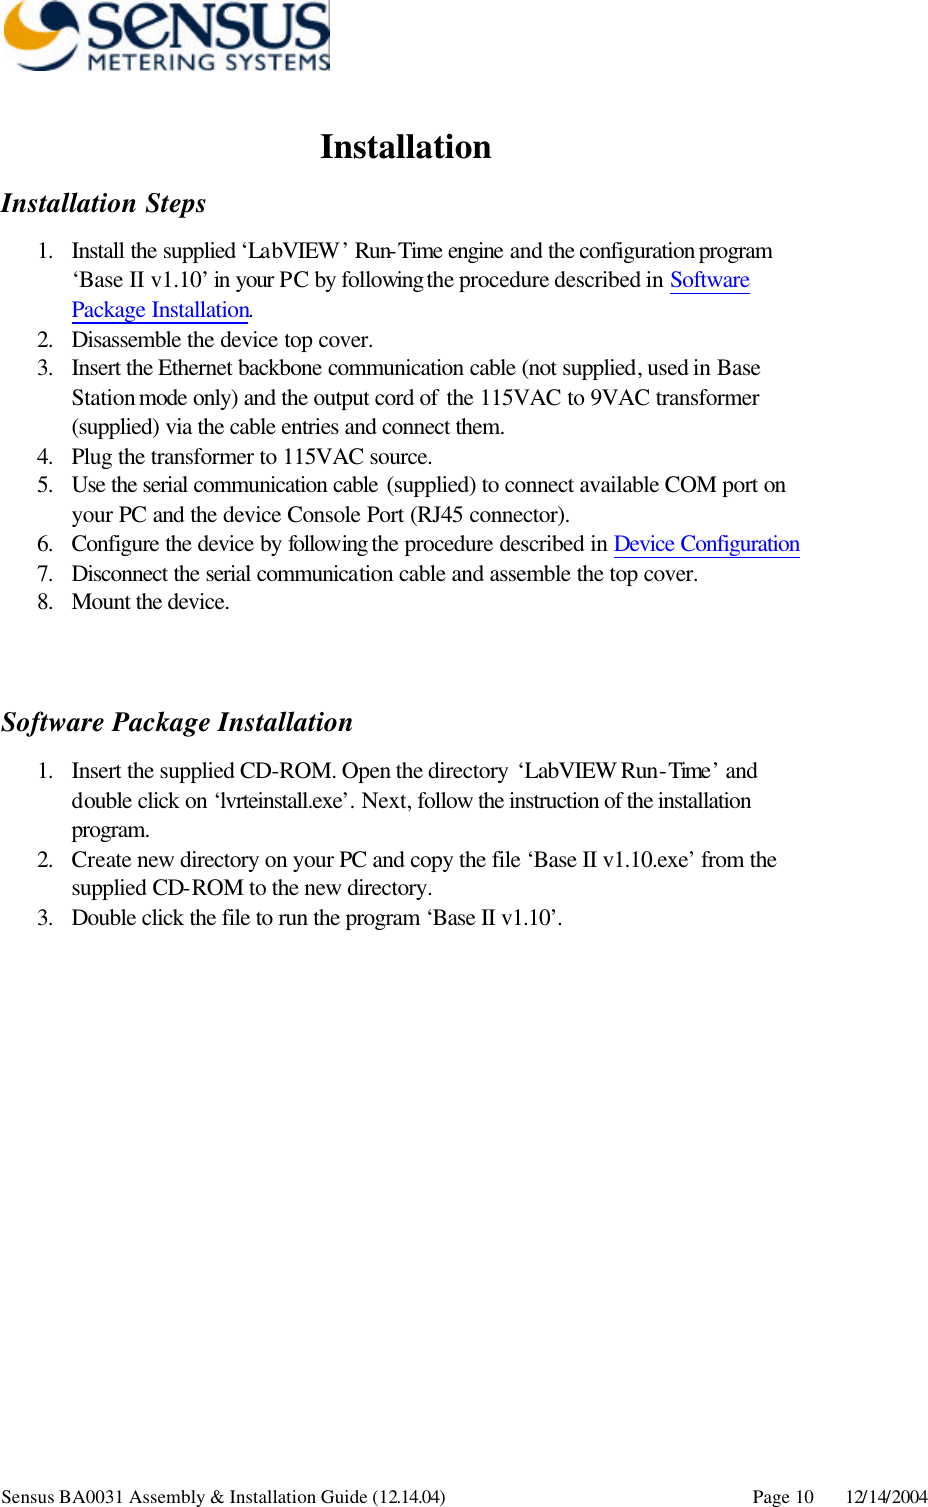      Sensus BA0031 Assembly &amp; Installation Guide (12.14.04) Page 10 12/14/2004 Installation Installation Steps 1. Install the supplied ‘LabVIEW’ Run-Time engine and the configuration program ‘Base II v1.10’ in your PC by following the procedure described in Software Package Installation. 2. Disassemble the device top cover.  3. Insert the Ethernet backbone communication cable (not supplied, used in Base Station mode only) and the output cord of the 115VAC to 9VAC transformer (supplied) via the cable entries and connect them. 4. Plug the transformer to 115VAC source. 5. Use the serial communication cable (supplied) to connect available COM port on your PC and the device Console Port (RJ45 connector). 6. Configure the device by following the procedure described in Device Configuration  7. Disconnect the serial communication cable and assemble the top cover. 8. Mount the device.     Software Package Installation 1. Insert the supplied CD-ROM. Open the directory ‘LabVIEW Run-Time’ and double click on ‘lvrteinstall.exe’. Next, follow the instruction of the installation program. 2. Create new directory on your PC and copy the file ‘Base II v1.10.exe’ from the supplied CD-ROM to the new directory. 3. Double click the file to run the program ‘Base II v1.10’.  